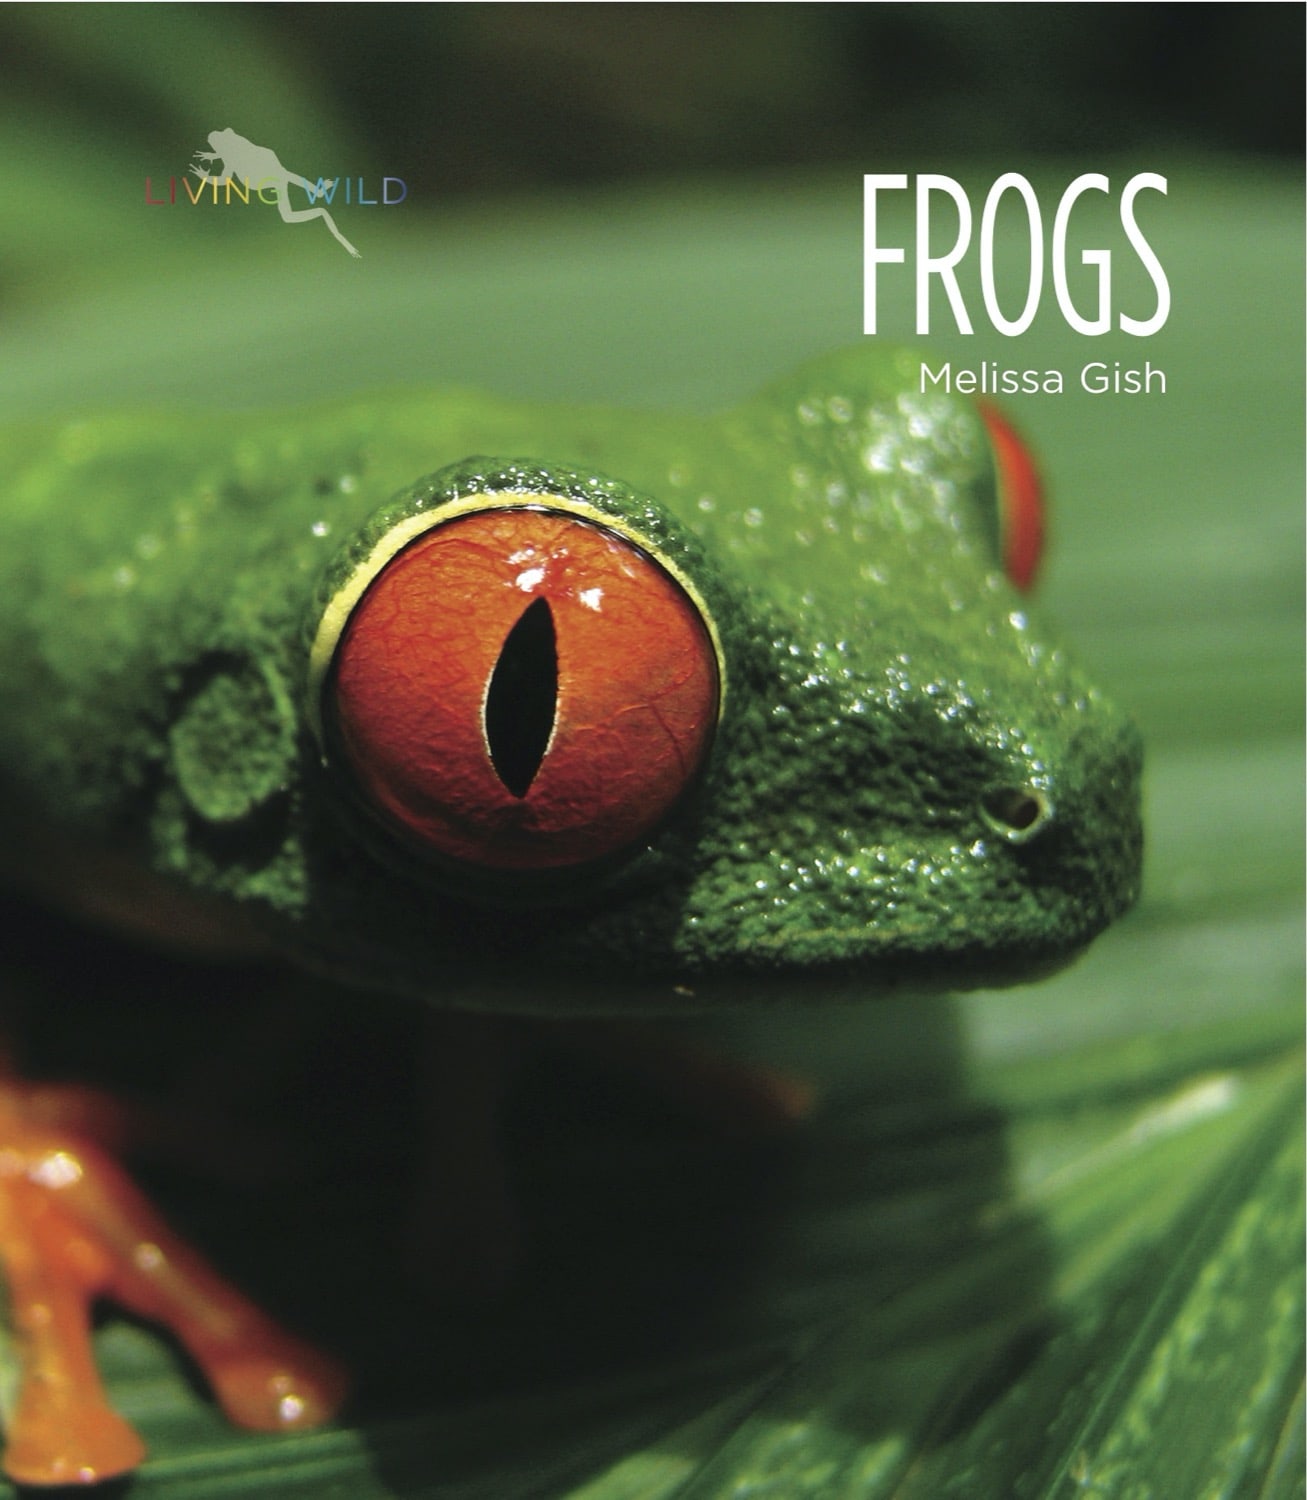 Living Wild - Classic Edition: Frogs